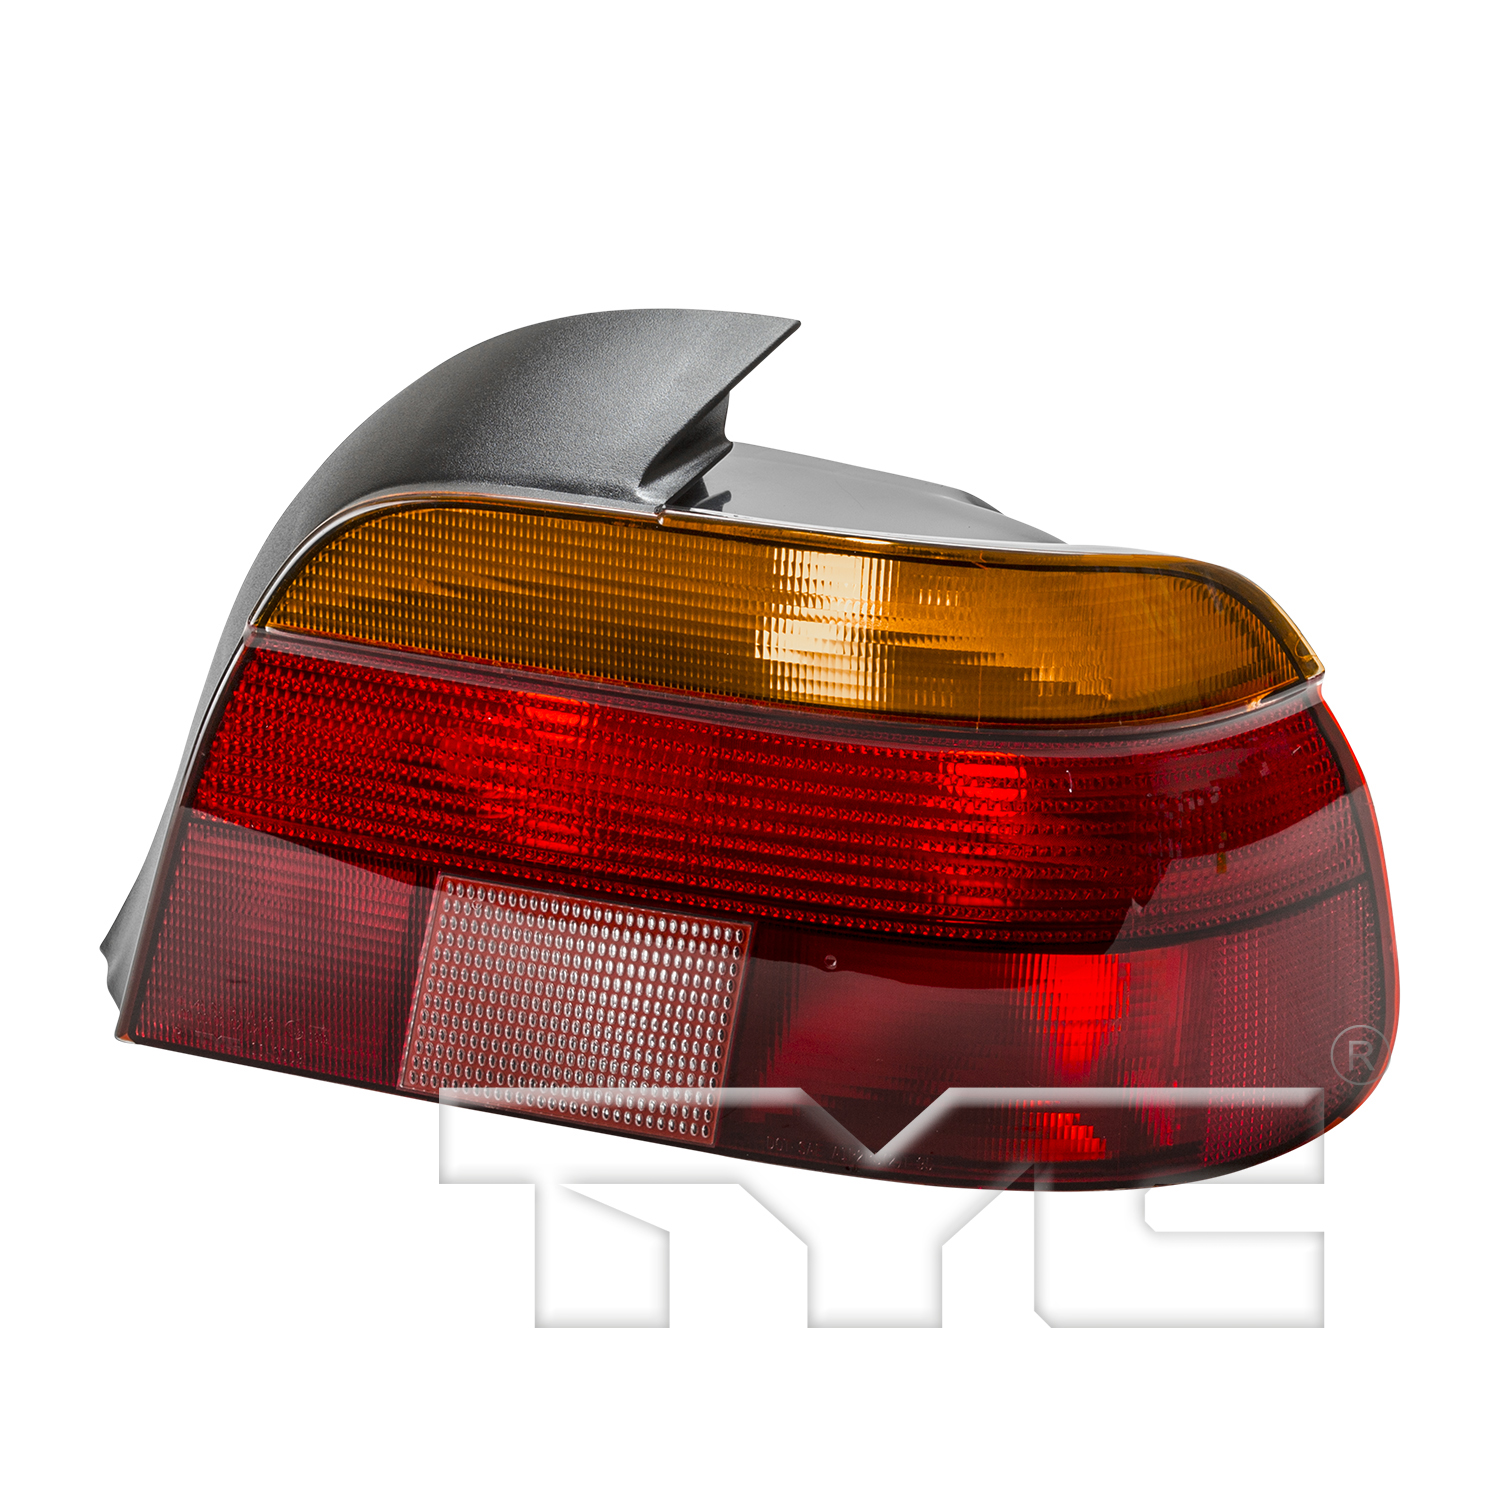 Aftermarket TAILLIGHTS for BMW - 528I, 528i,97-00,RT Taillamp assy